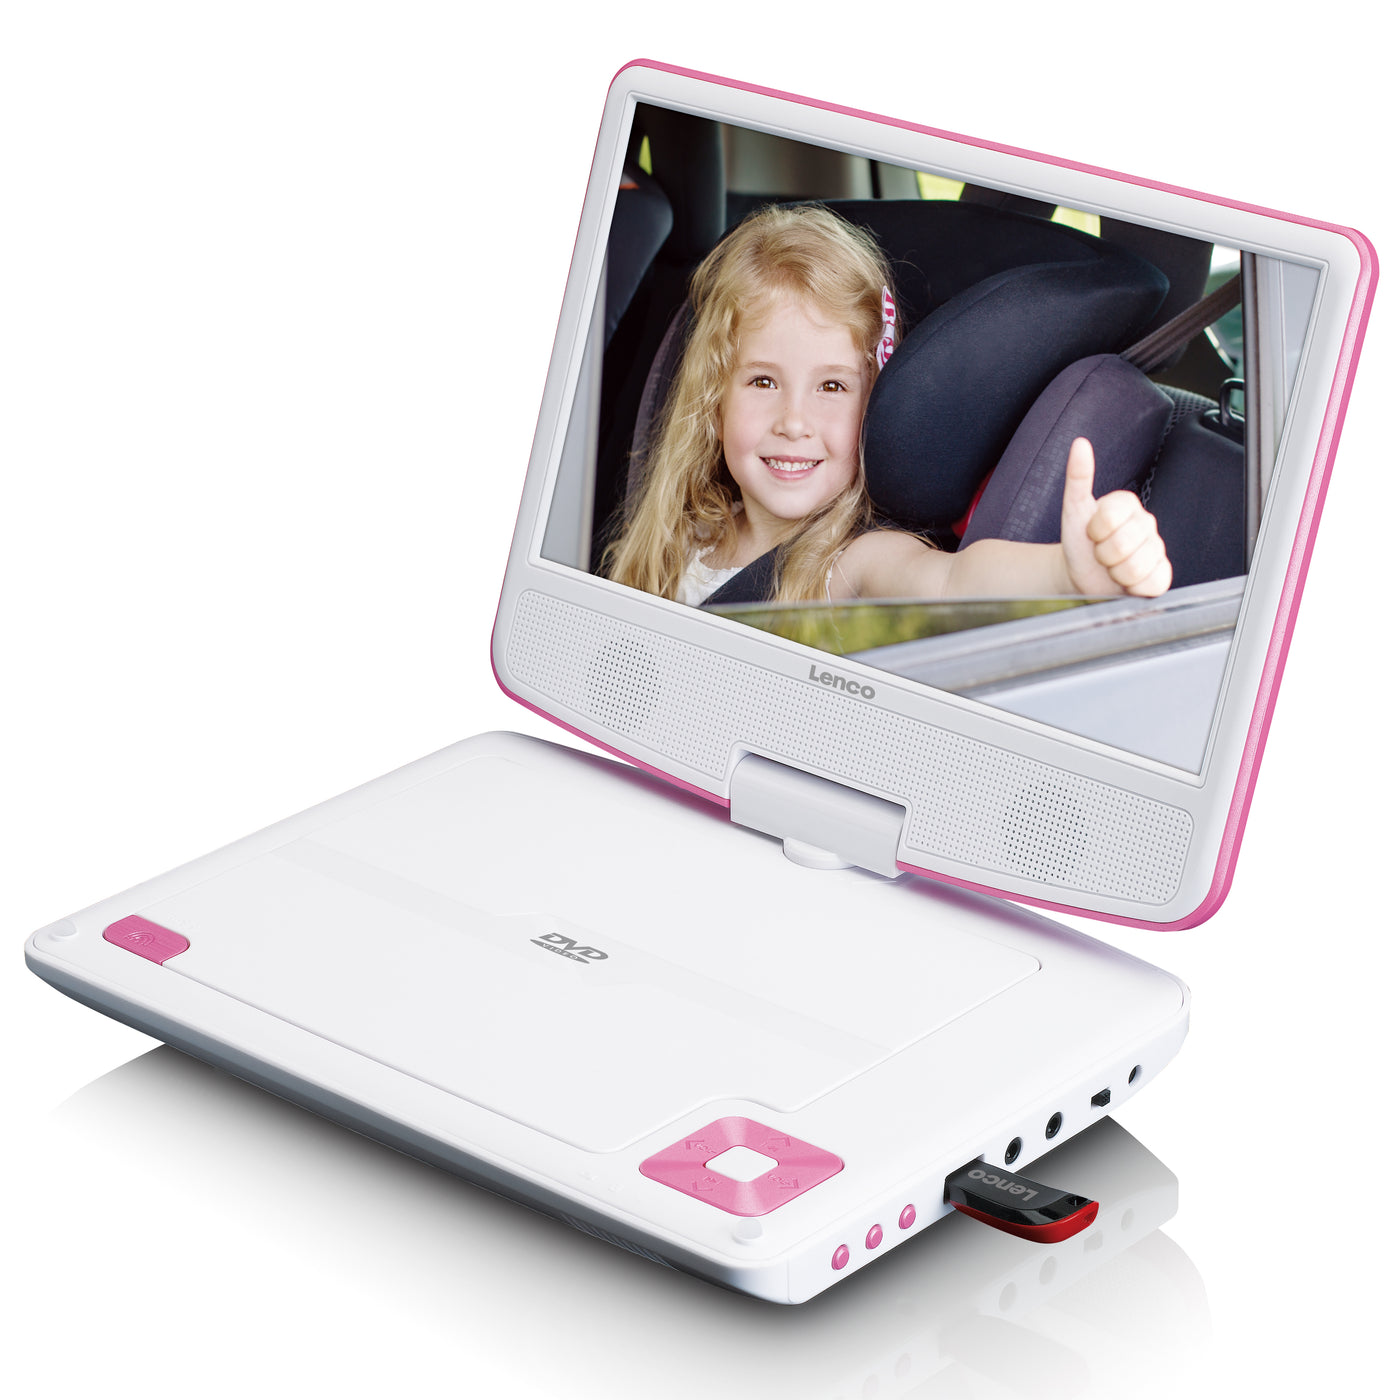 LENCO DVP-910PK - Portable 9" DVD player with USB headphones and mounting bracket - Pink/white